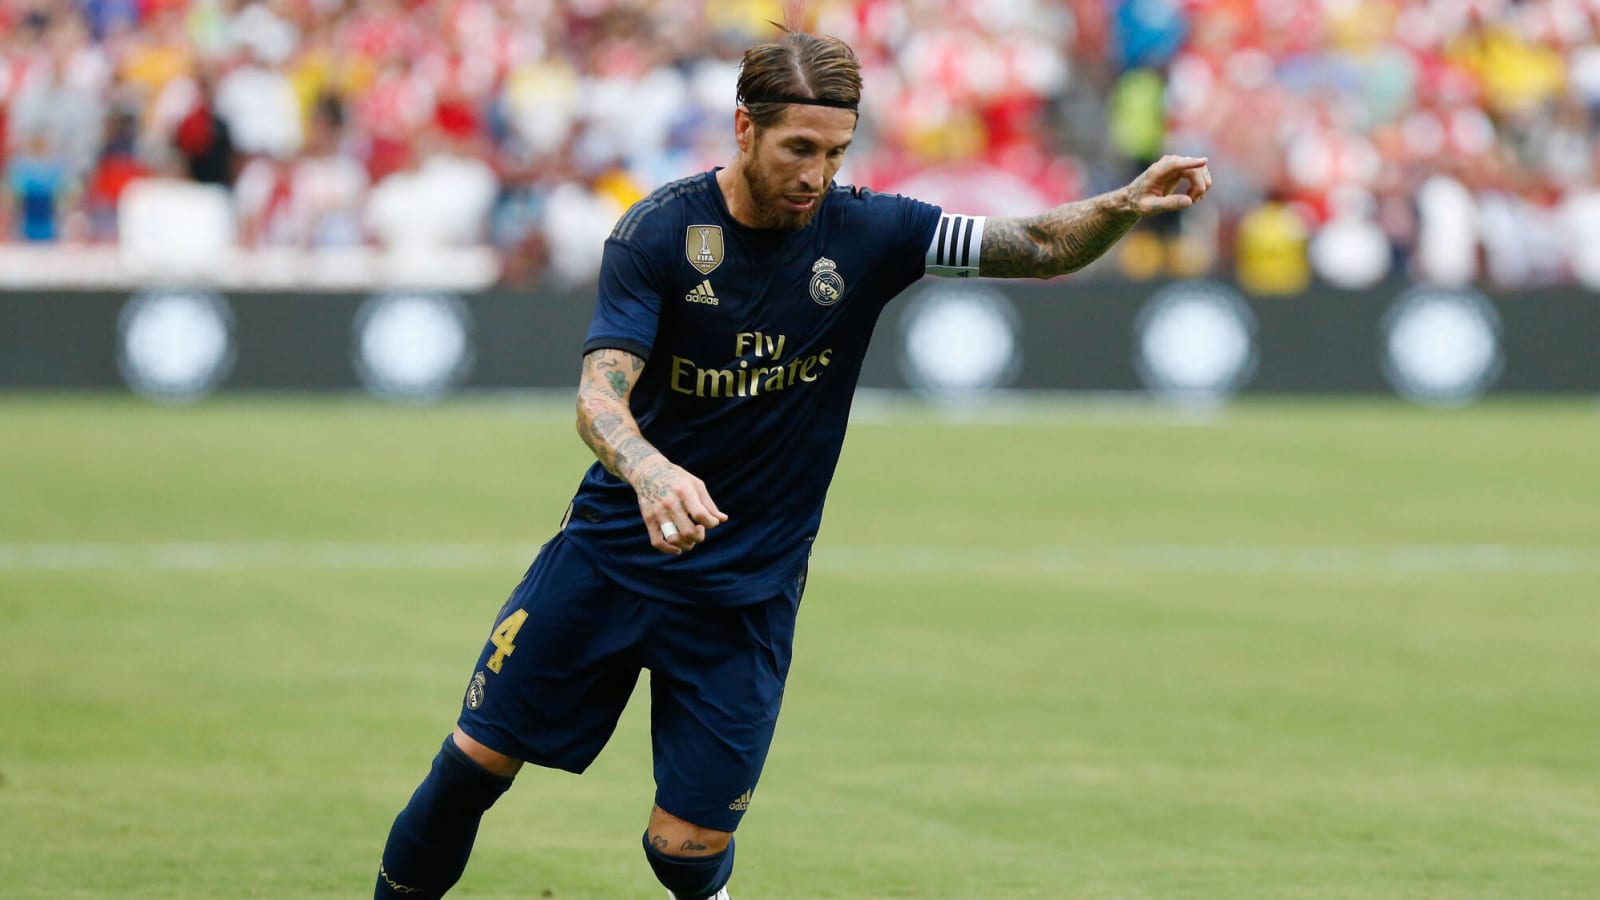 Sergio Ramos is still without a team: could he join Real Madrid? - AS USA